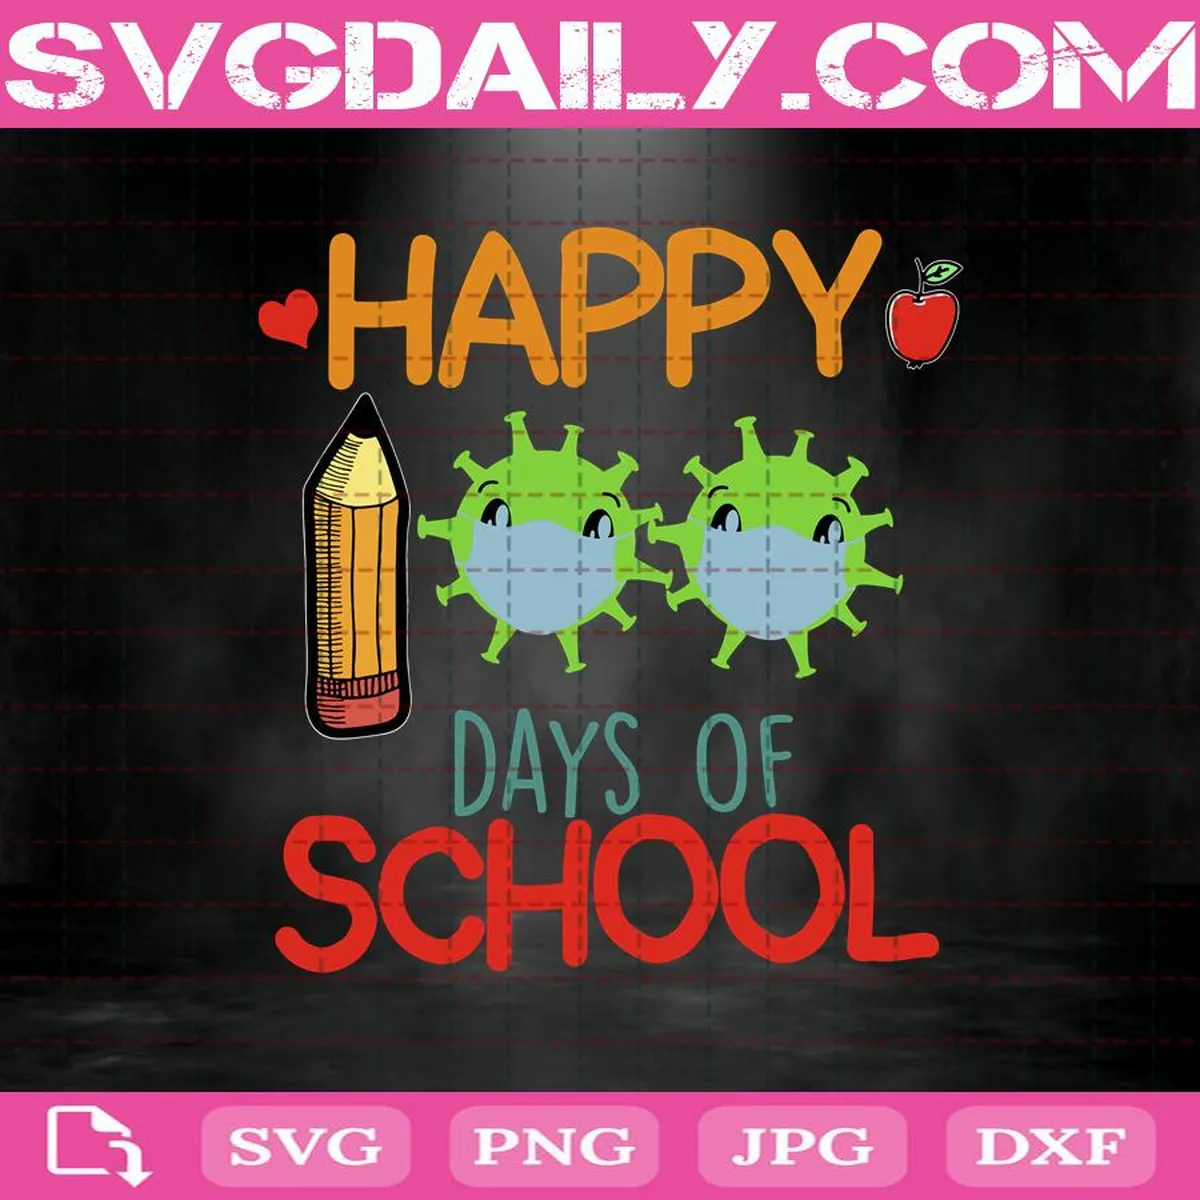 Happy 100th Day Of School Svg, 100th Day Of School Svg, Covid 19 Pandemic Quarantine School Gift Student Teachers Kids, Digital File Printable, Instant Download